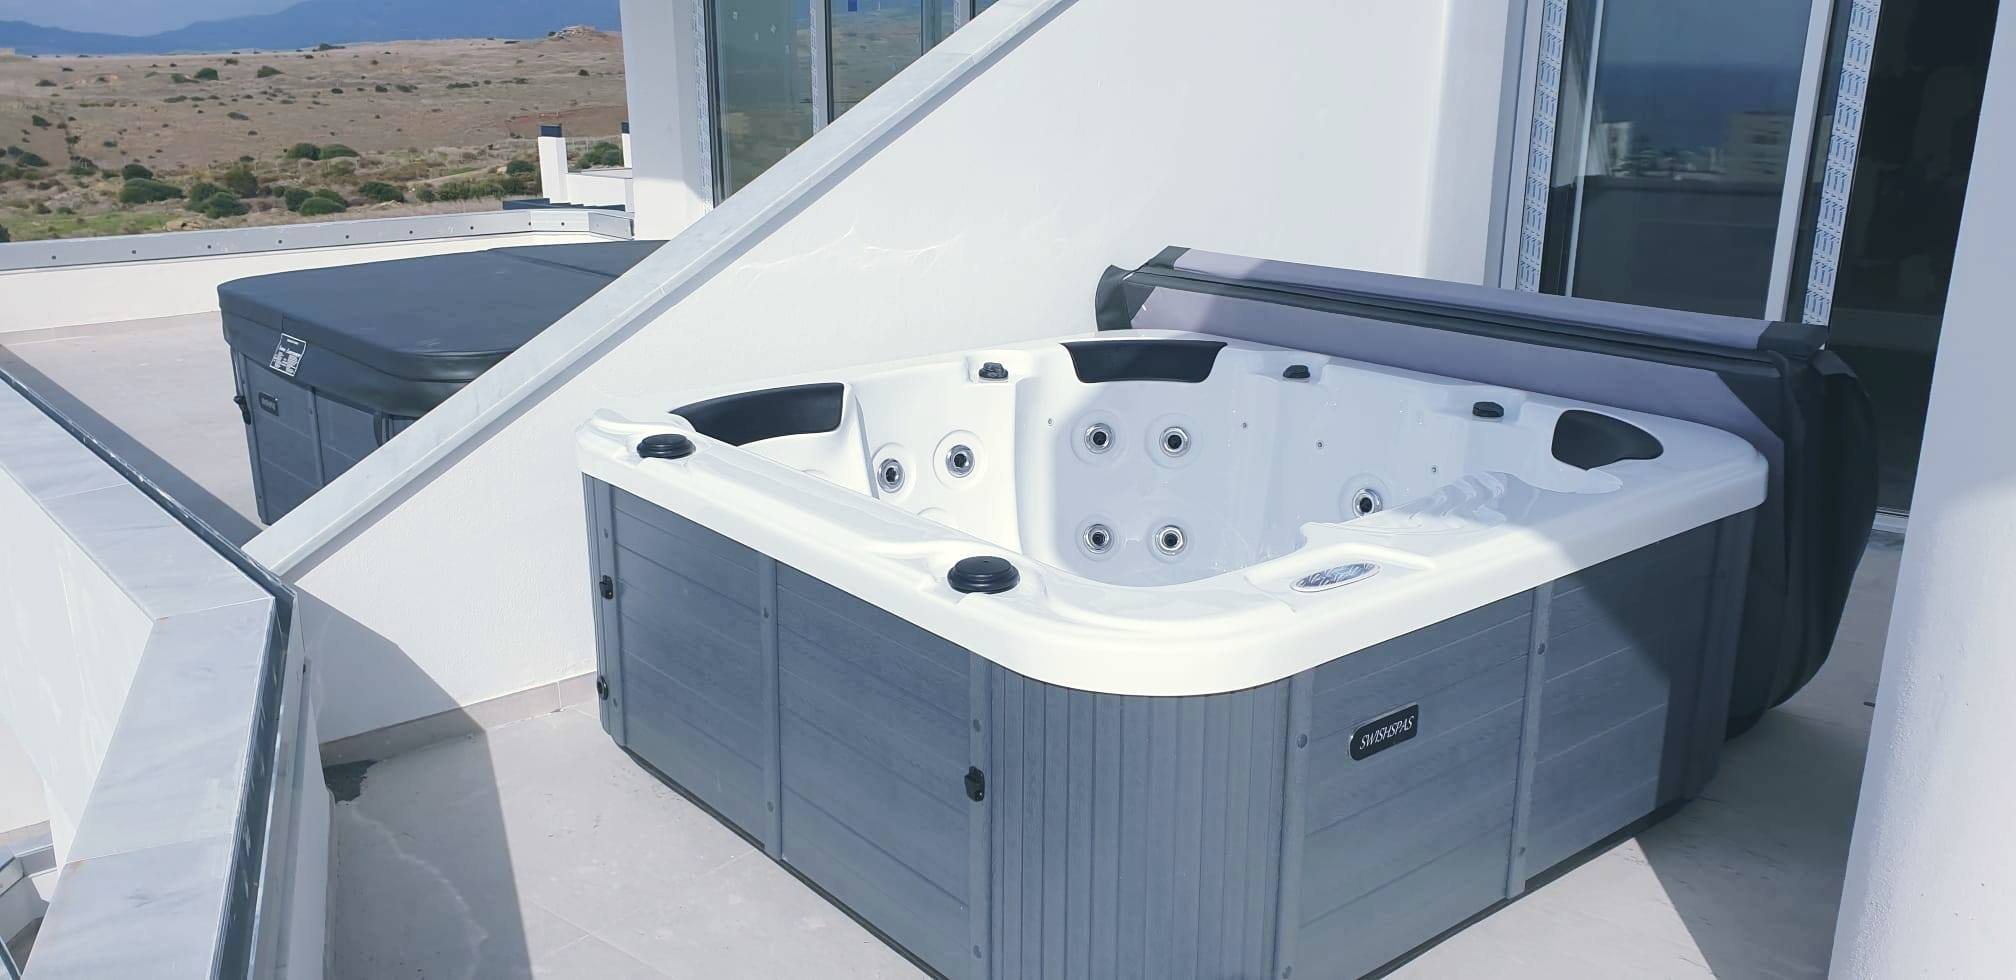 Favells Swishspas is a range of spas which has been developed with two main principles: first for build quality and seco... » Outdoor Furniture Fuengirola, Costa Del Sol, Spain